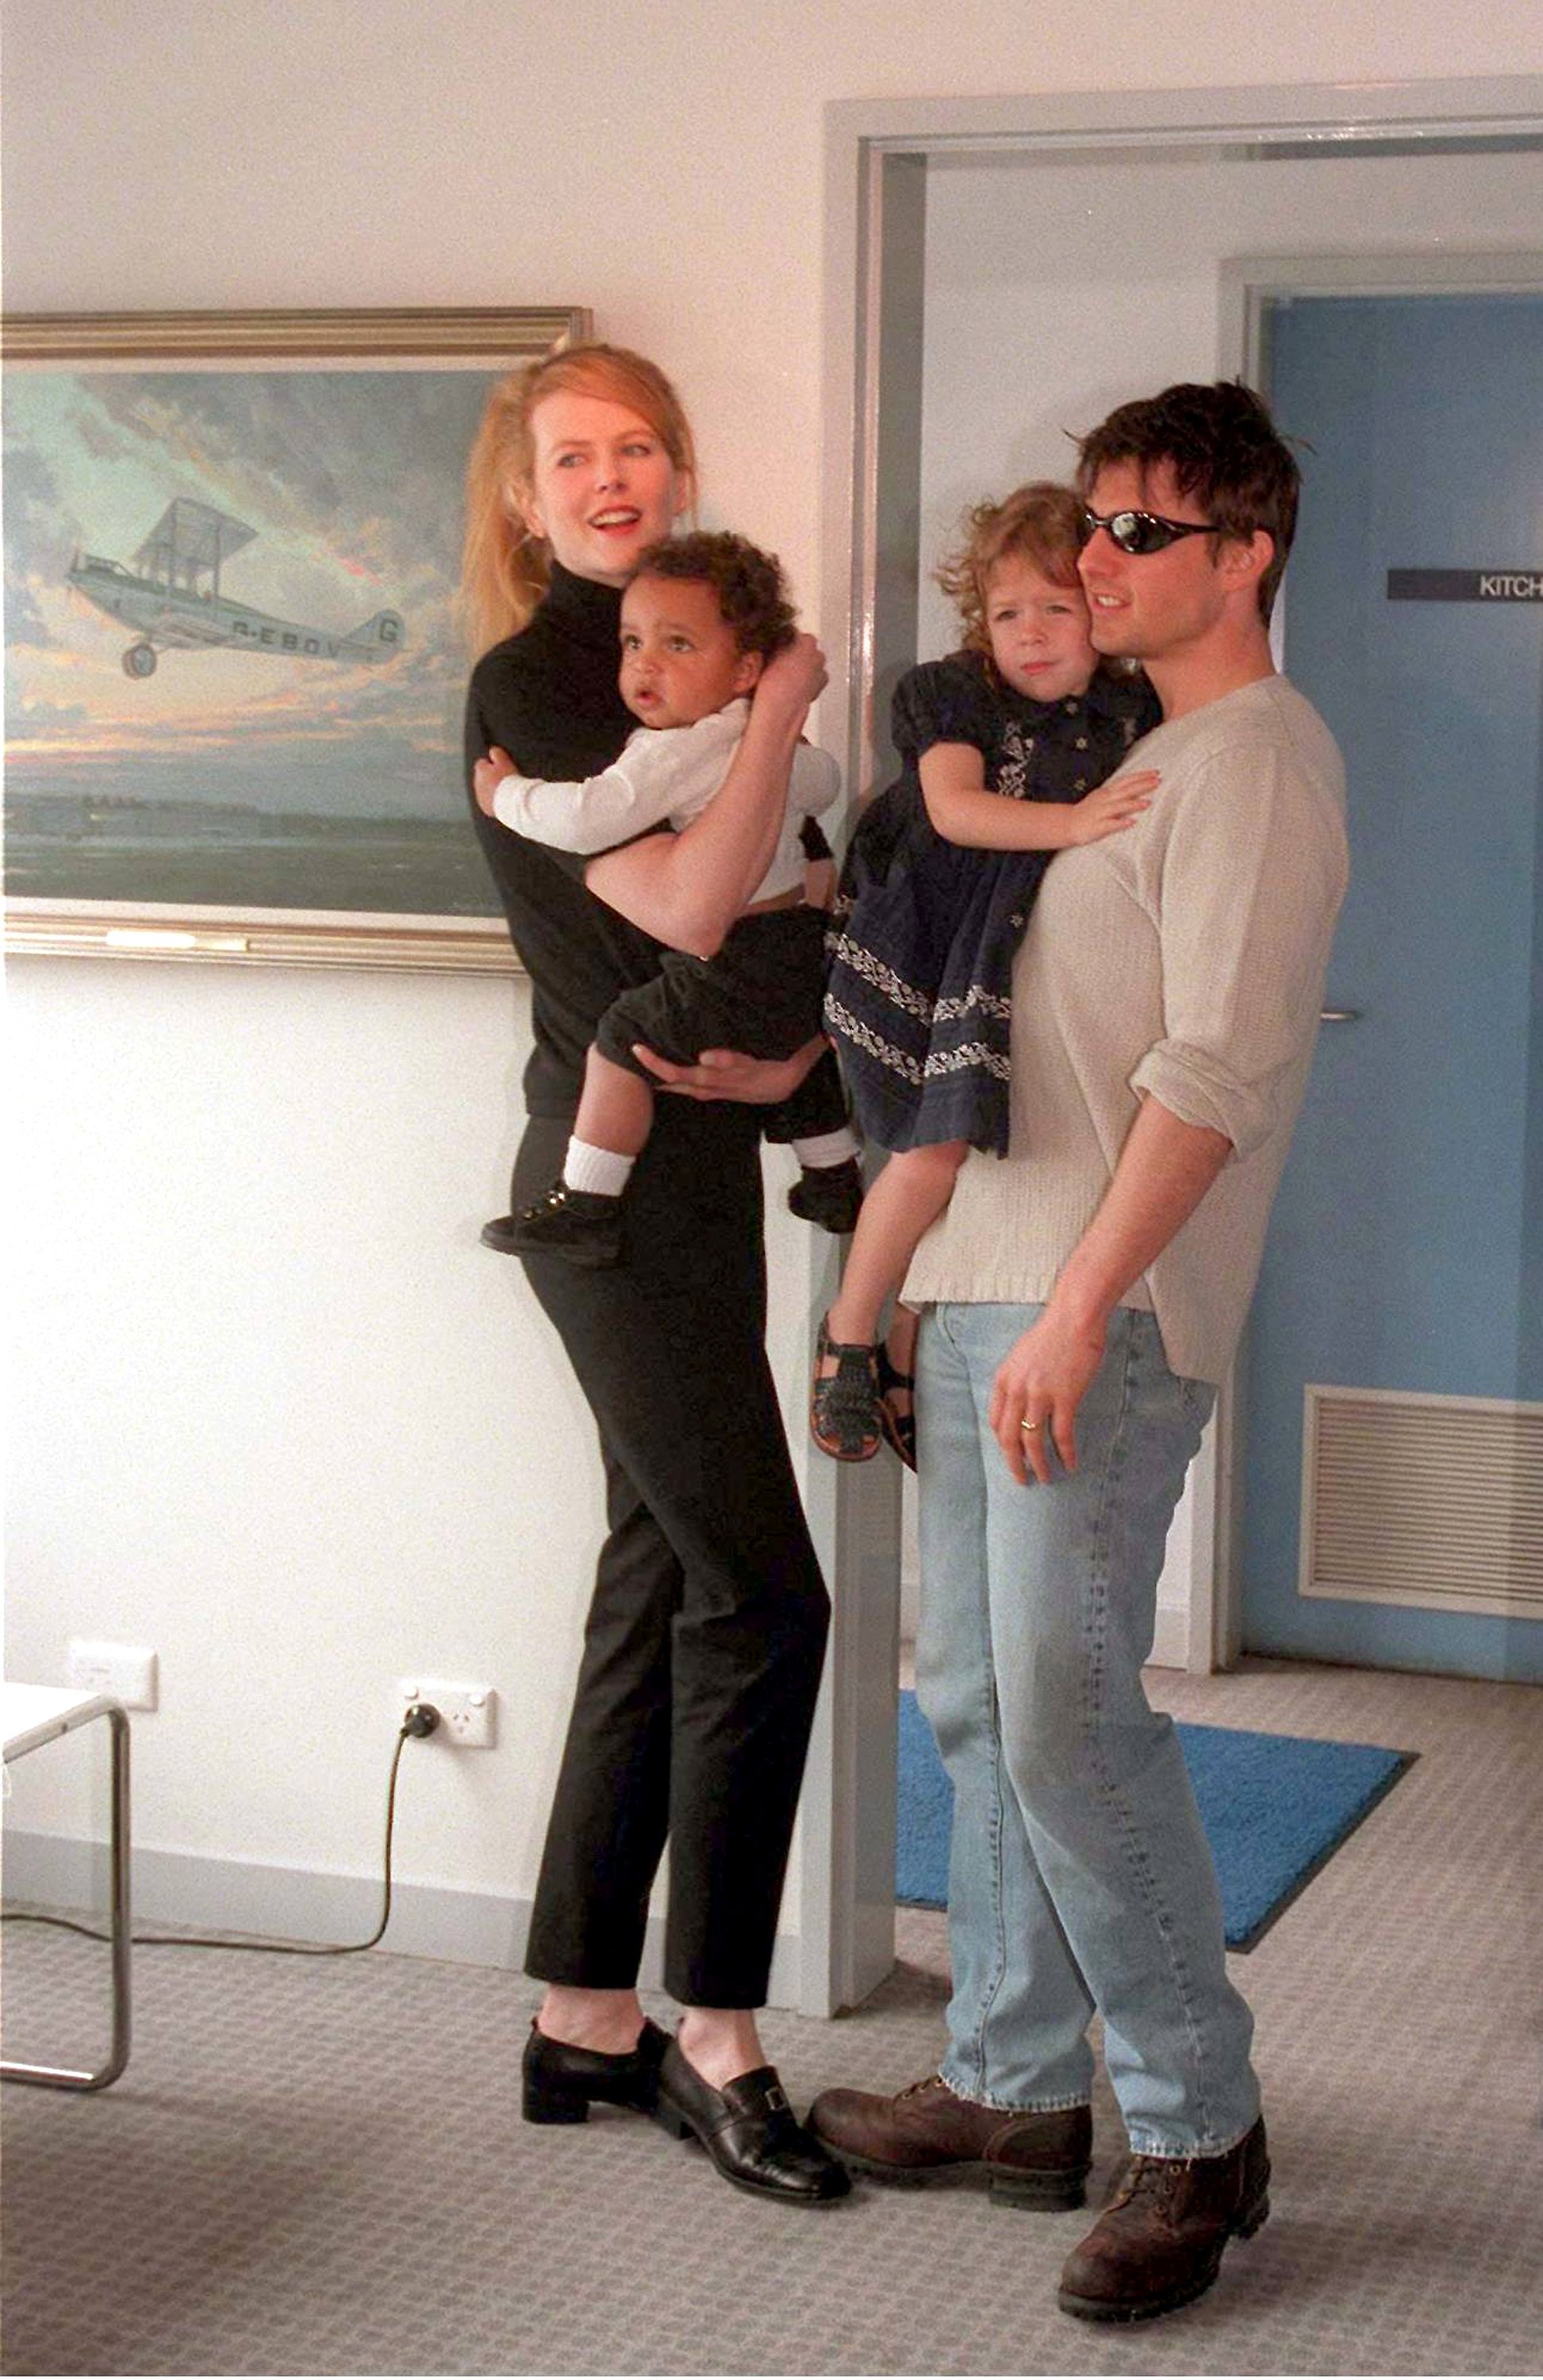 Actors Nicole Kidman and husband Tom Cruise arrive at Sydney Kingsford Smith airport and introduce their children Connor and Isabella to the media January 24, 1996 in Sydney, Australia. | Source: Getty Images